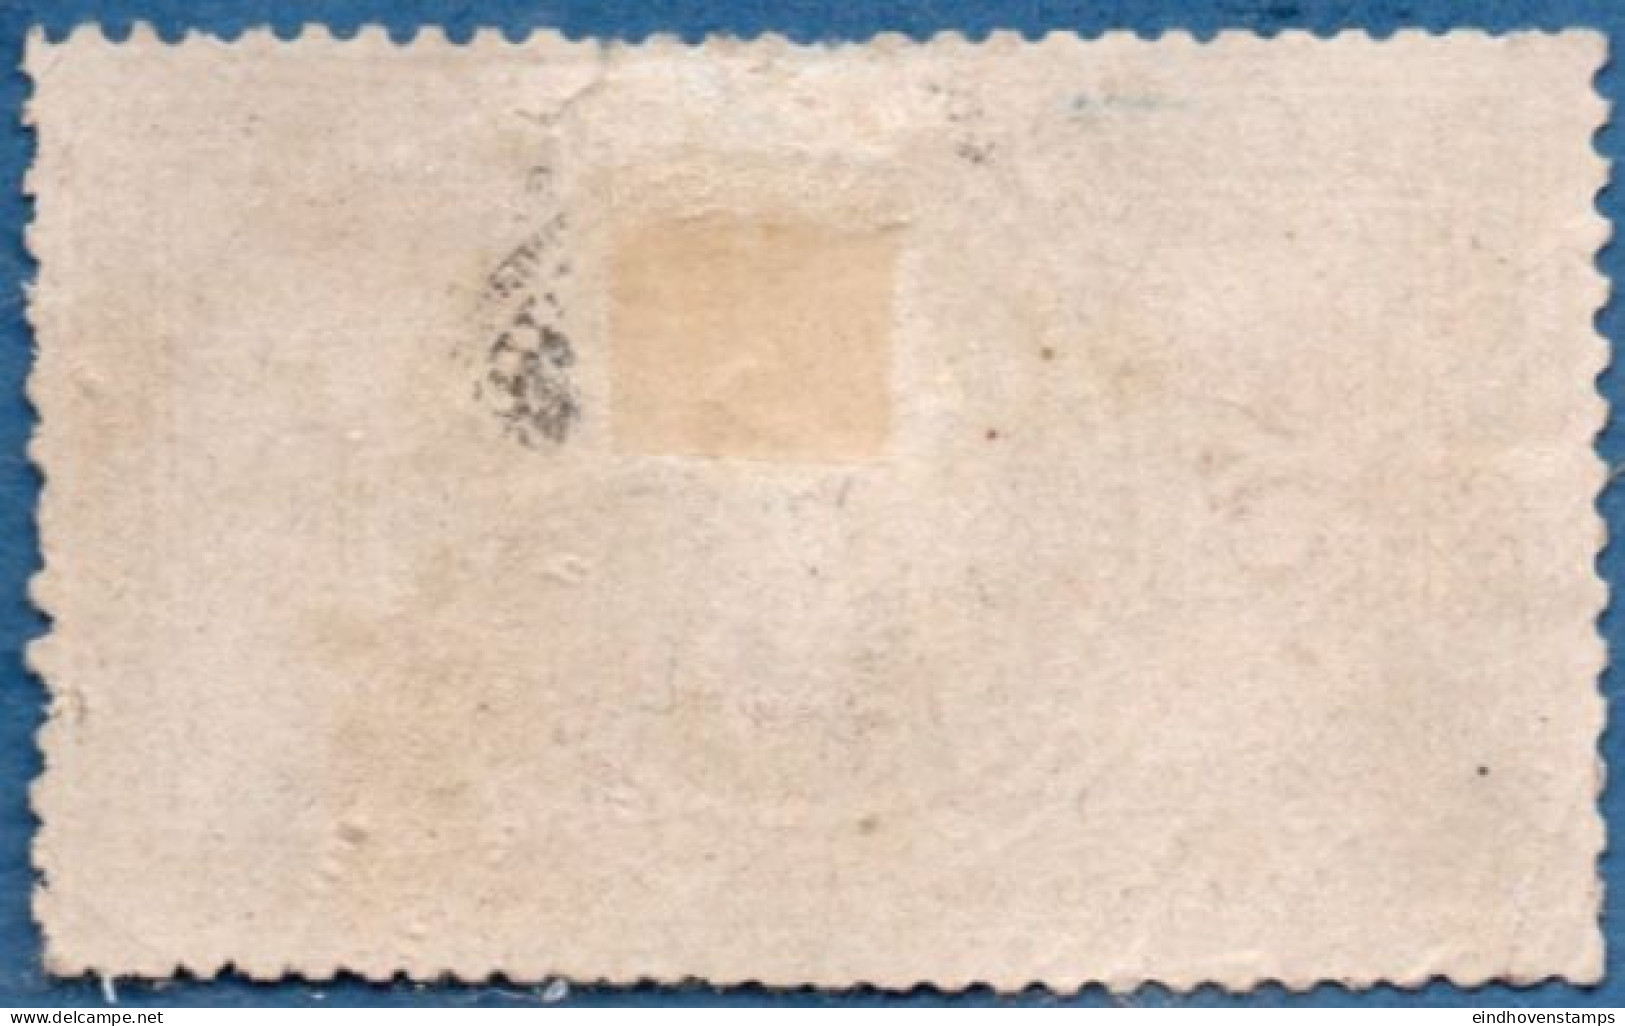 France 1869 5 Fr Cancelled Paris Star 5 - Bd Saint Martin, Thin From Pasting On Clerq's Desk - 1863-1870 Napoléon III Lauré